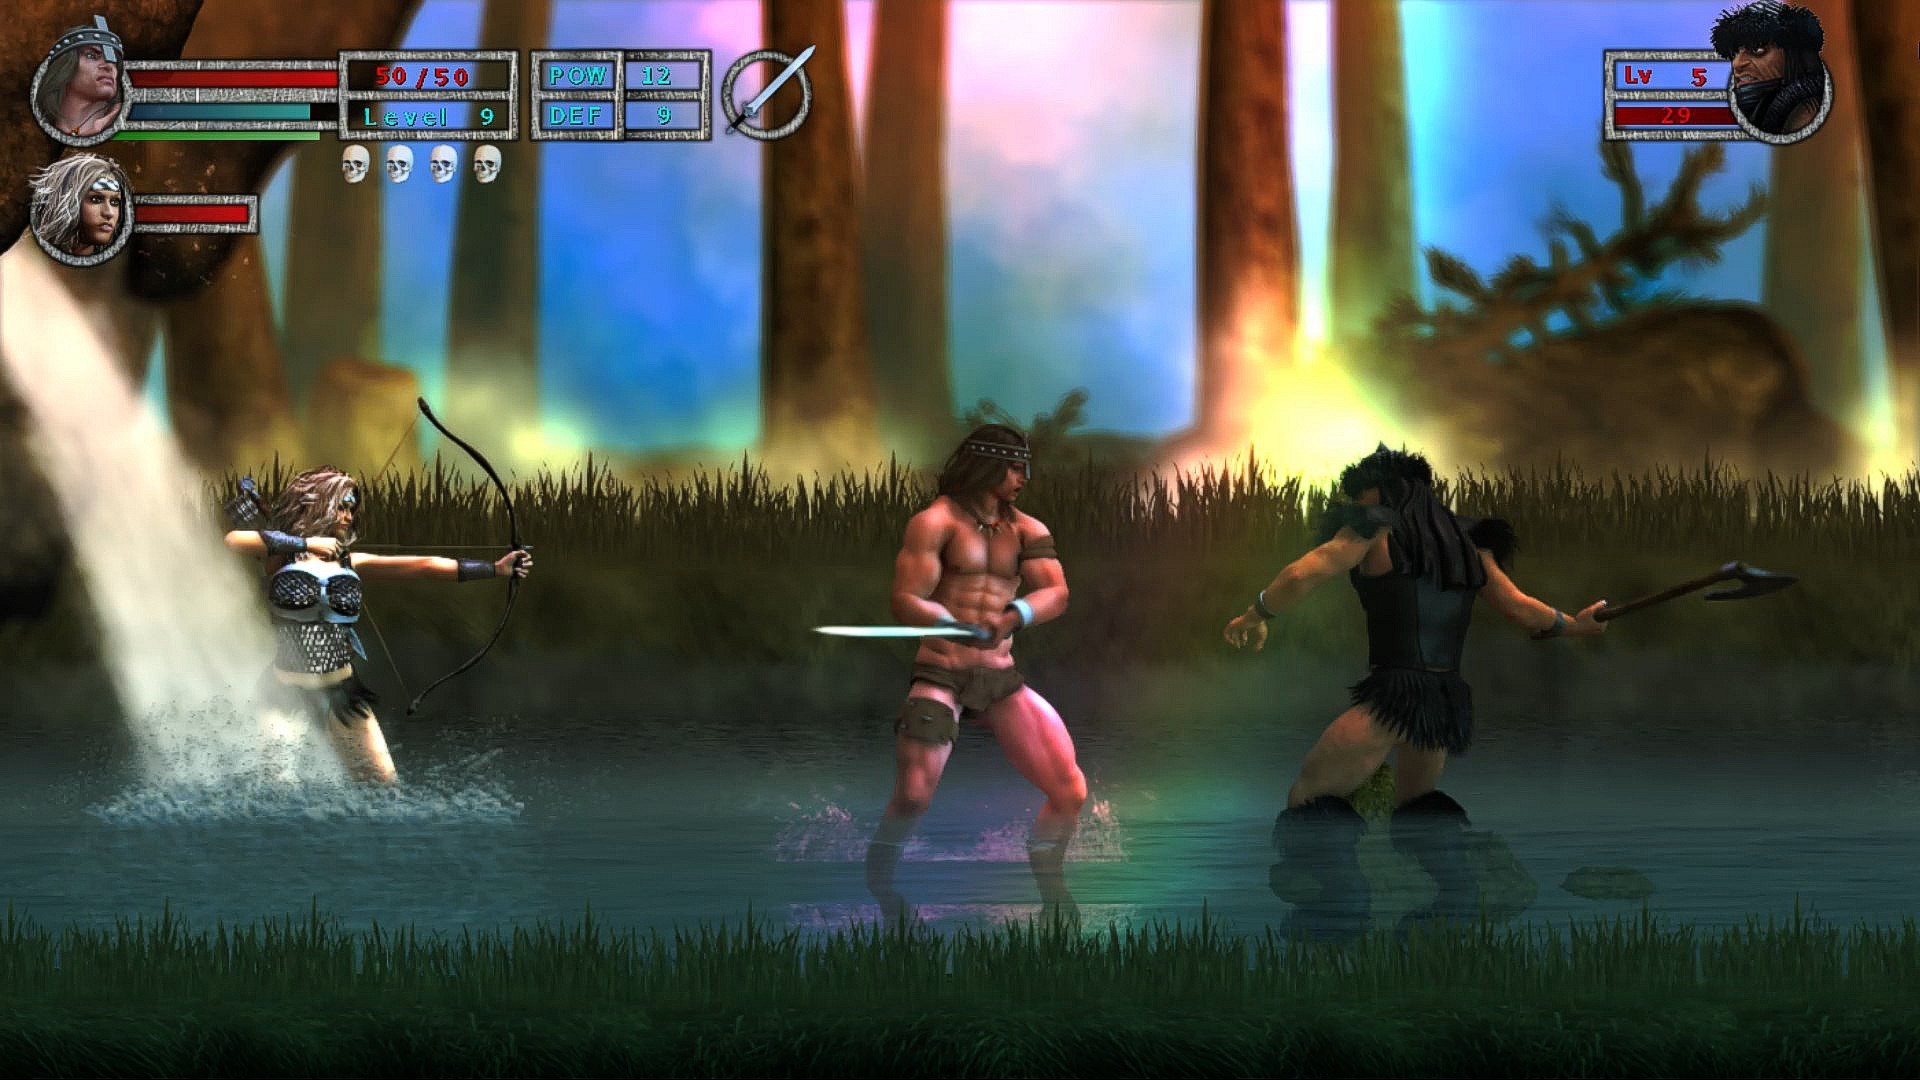 Age of barbarian extended cut. Игра age of Barbarian. Последний варвар игра. Age of Barbarian Sheyna.